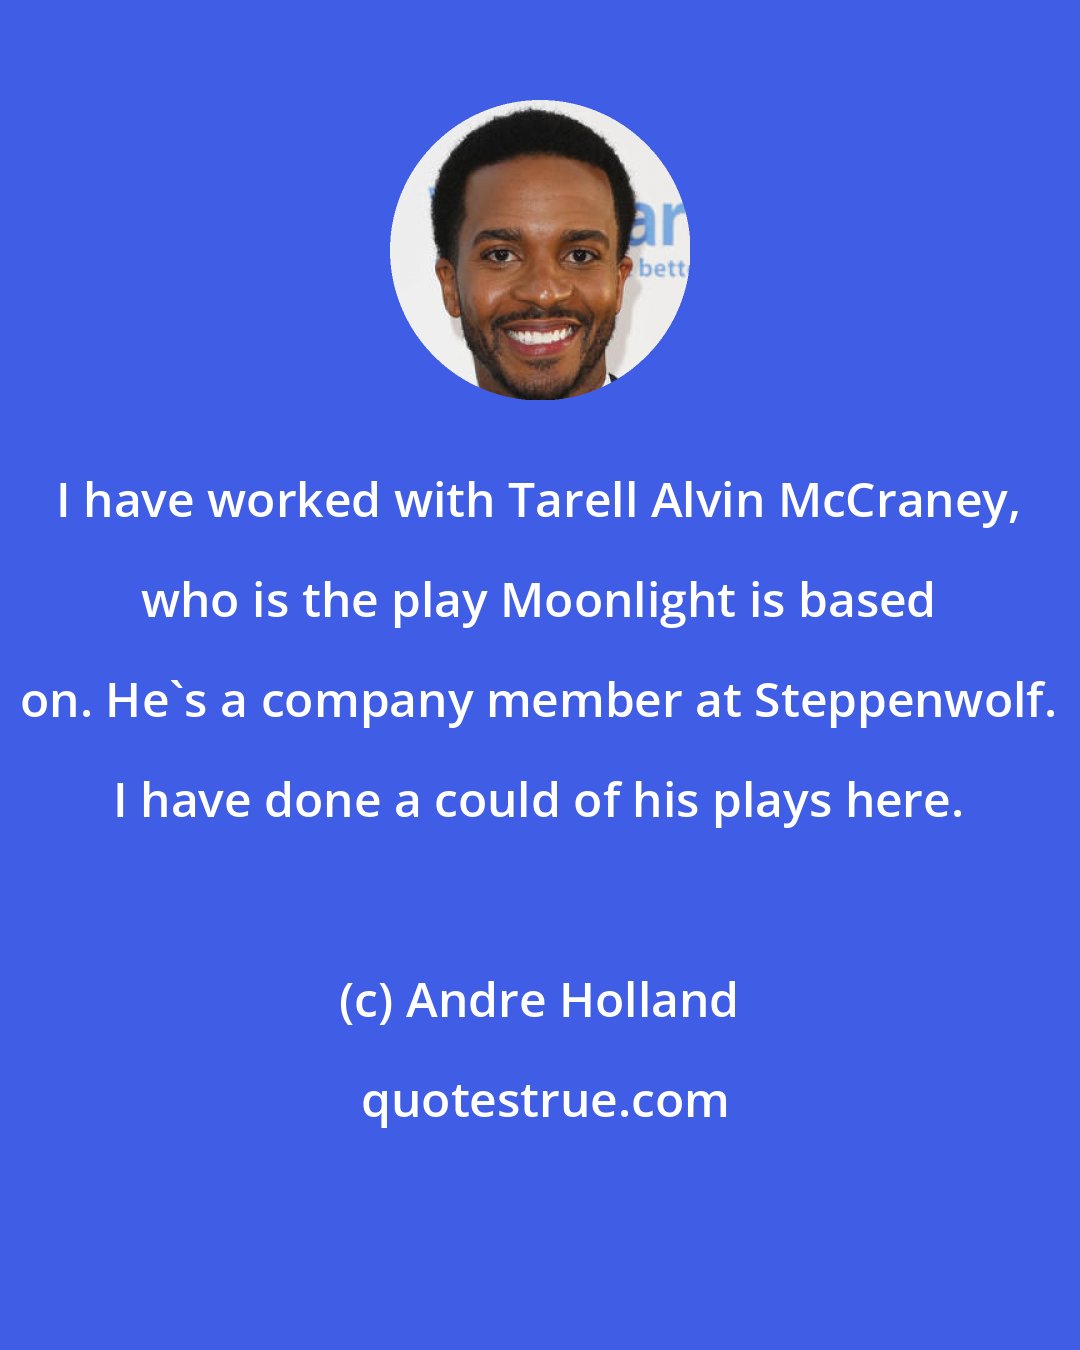 Andre Holland: I have worked with Tarell Alvin McCraney, who is the play Moonlight is based on. He's a company member at Steppenwolf. I have done a could of his plays here.